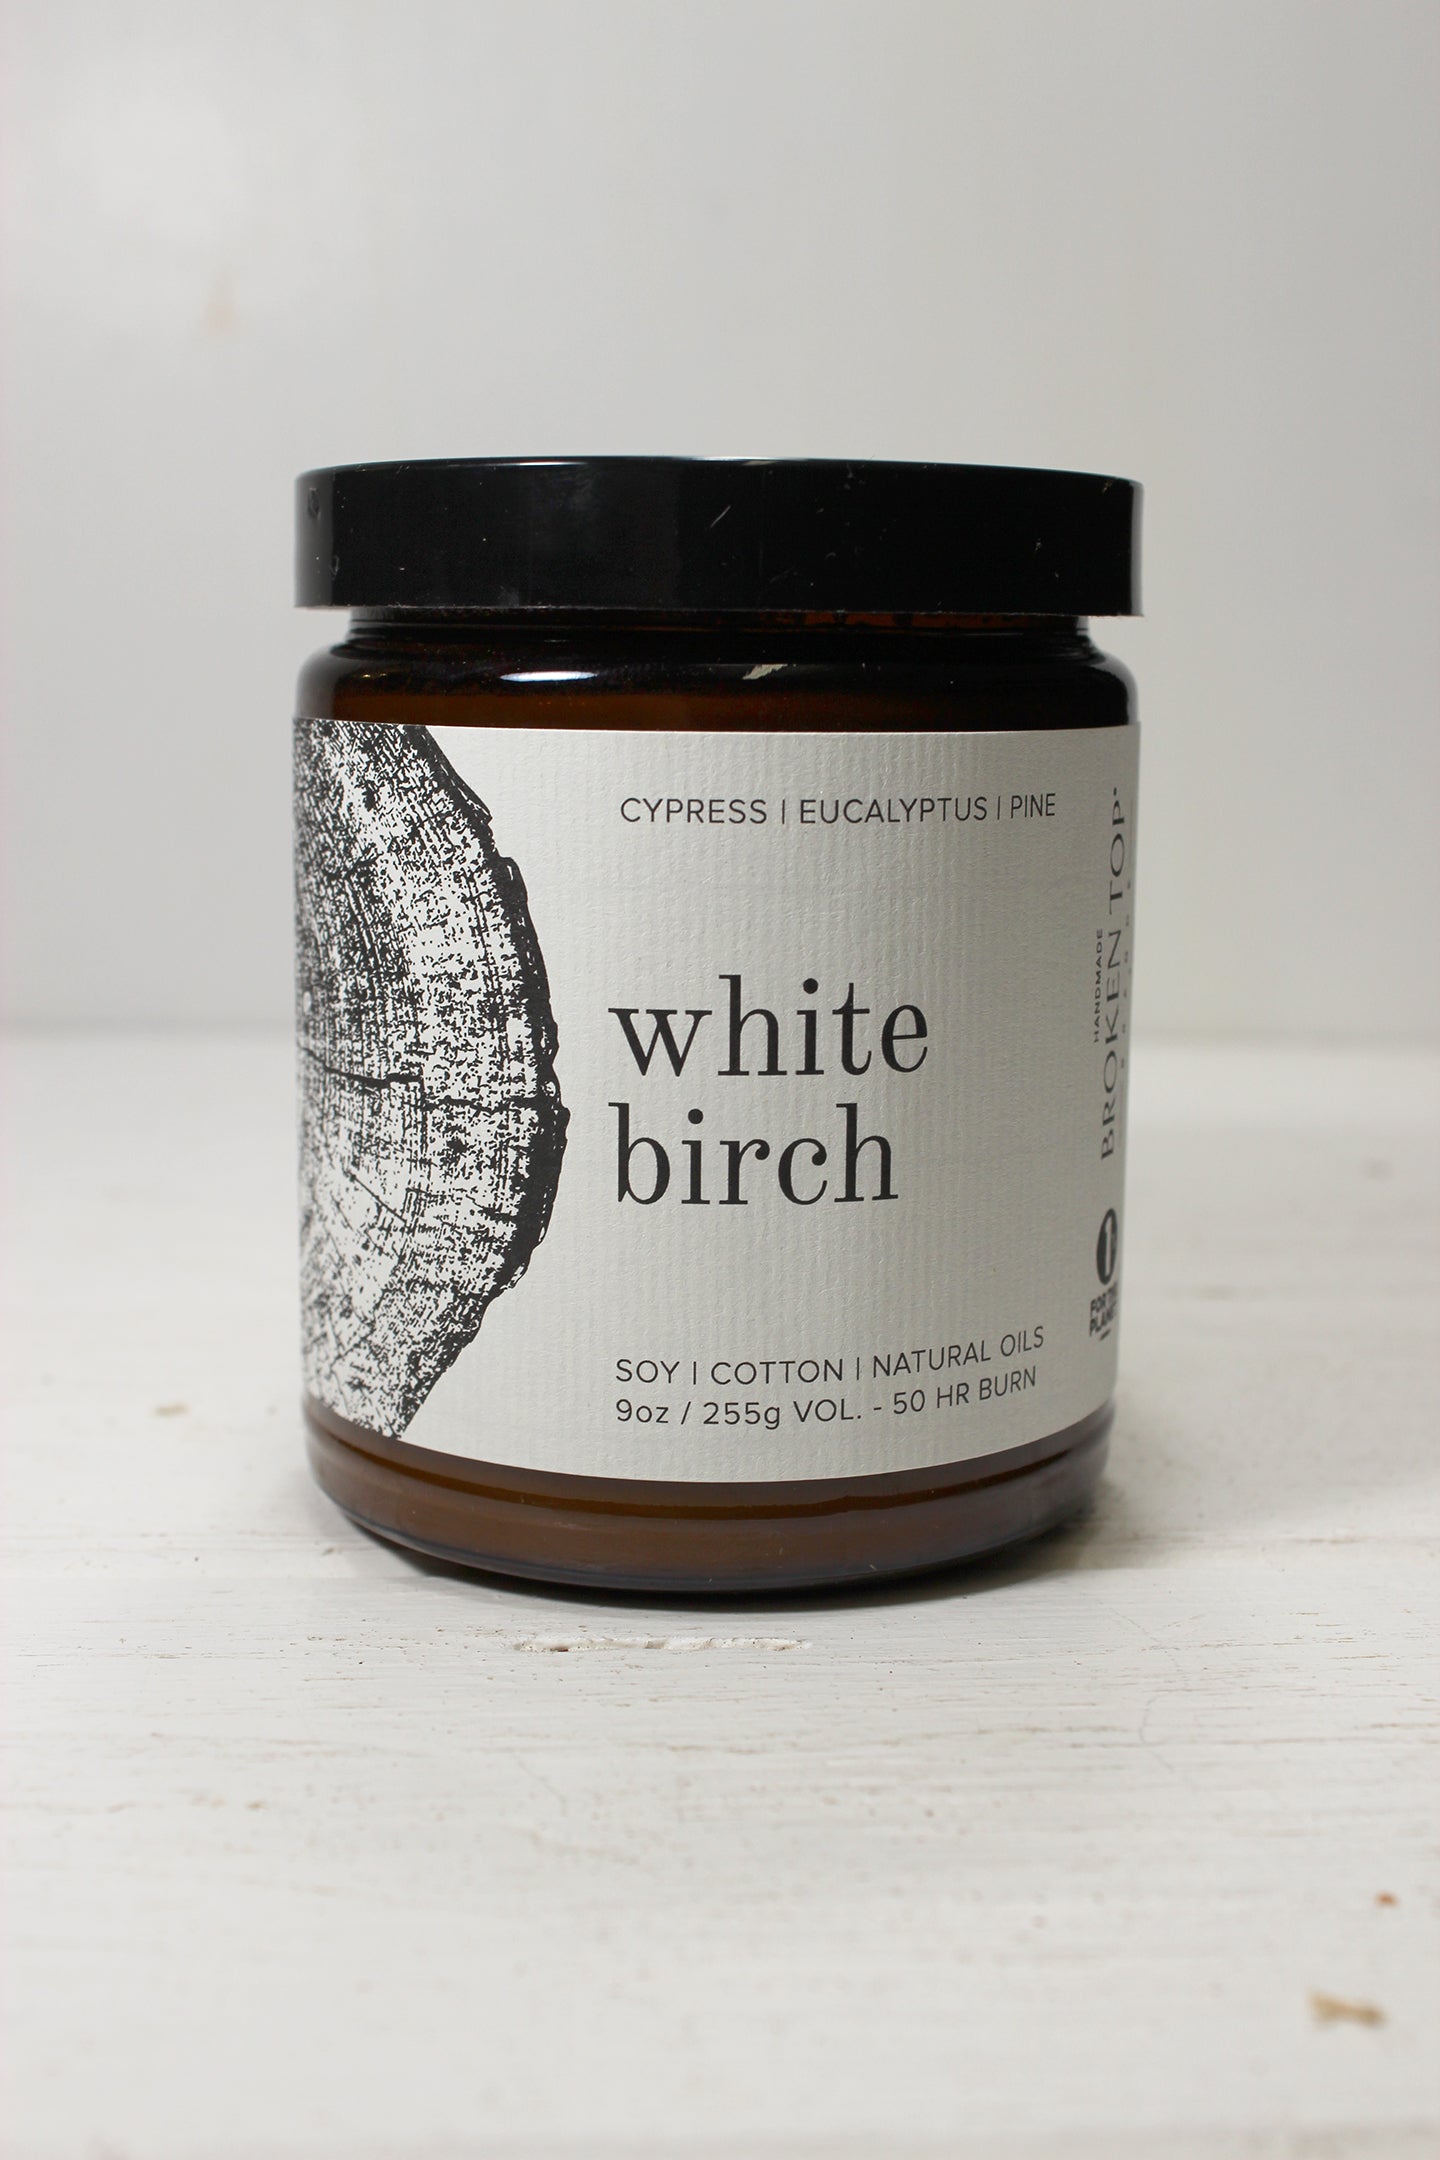 White Birch Candle by Broken Top Candle Co Co